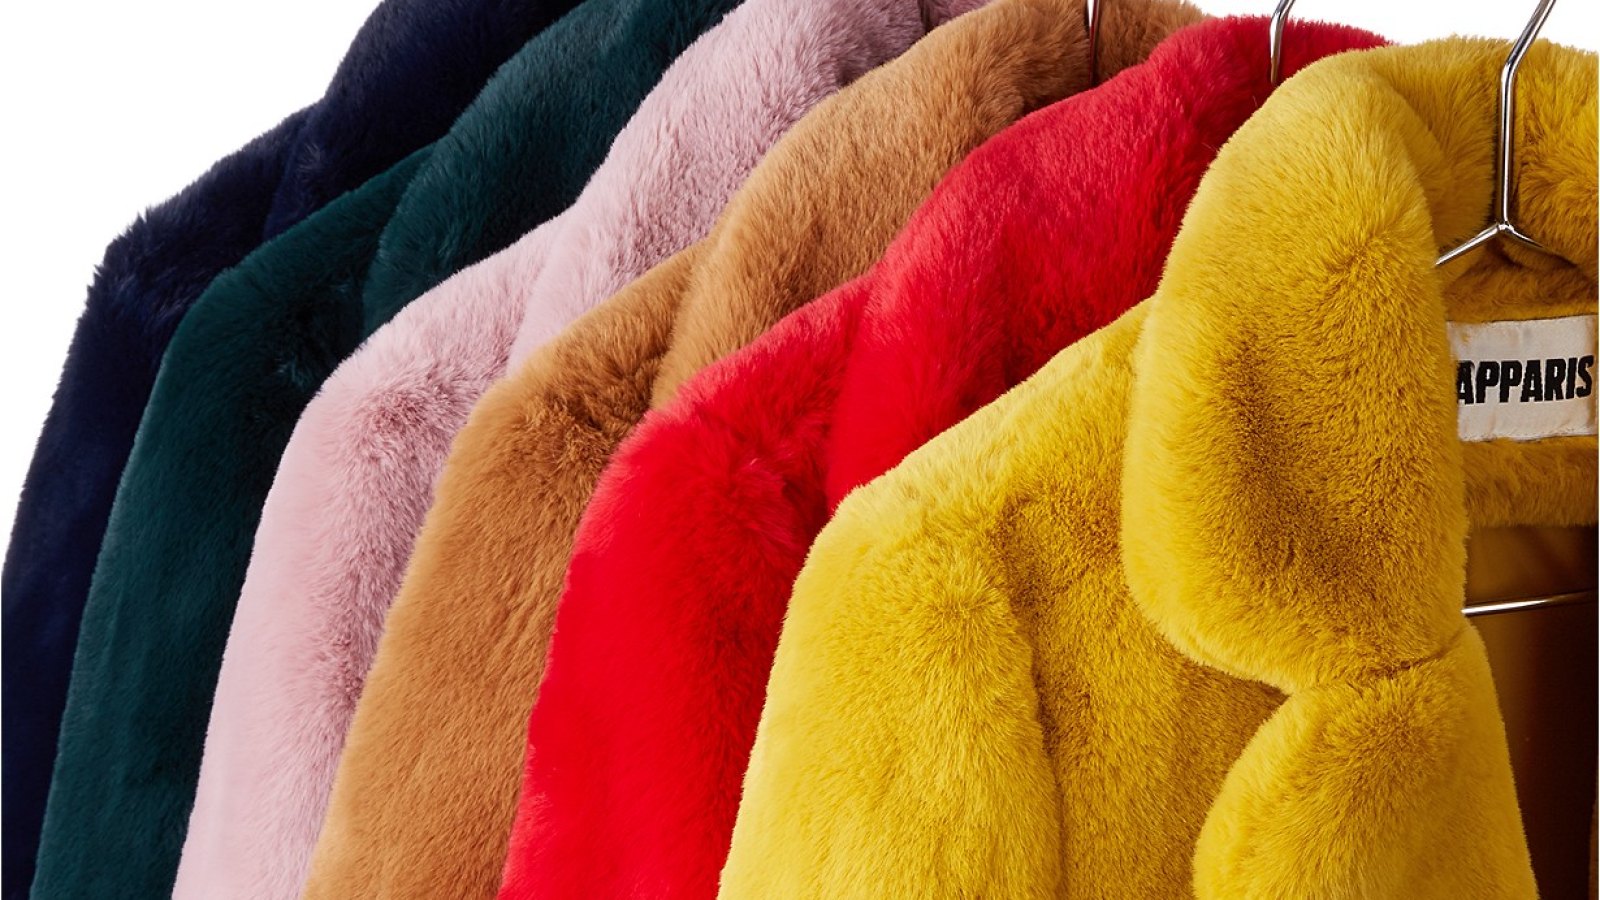 Apparis Faux-Fur Coat Is a Must-Have in Every Color